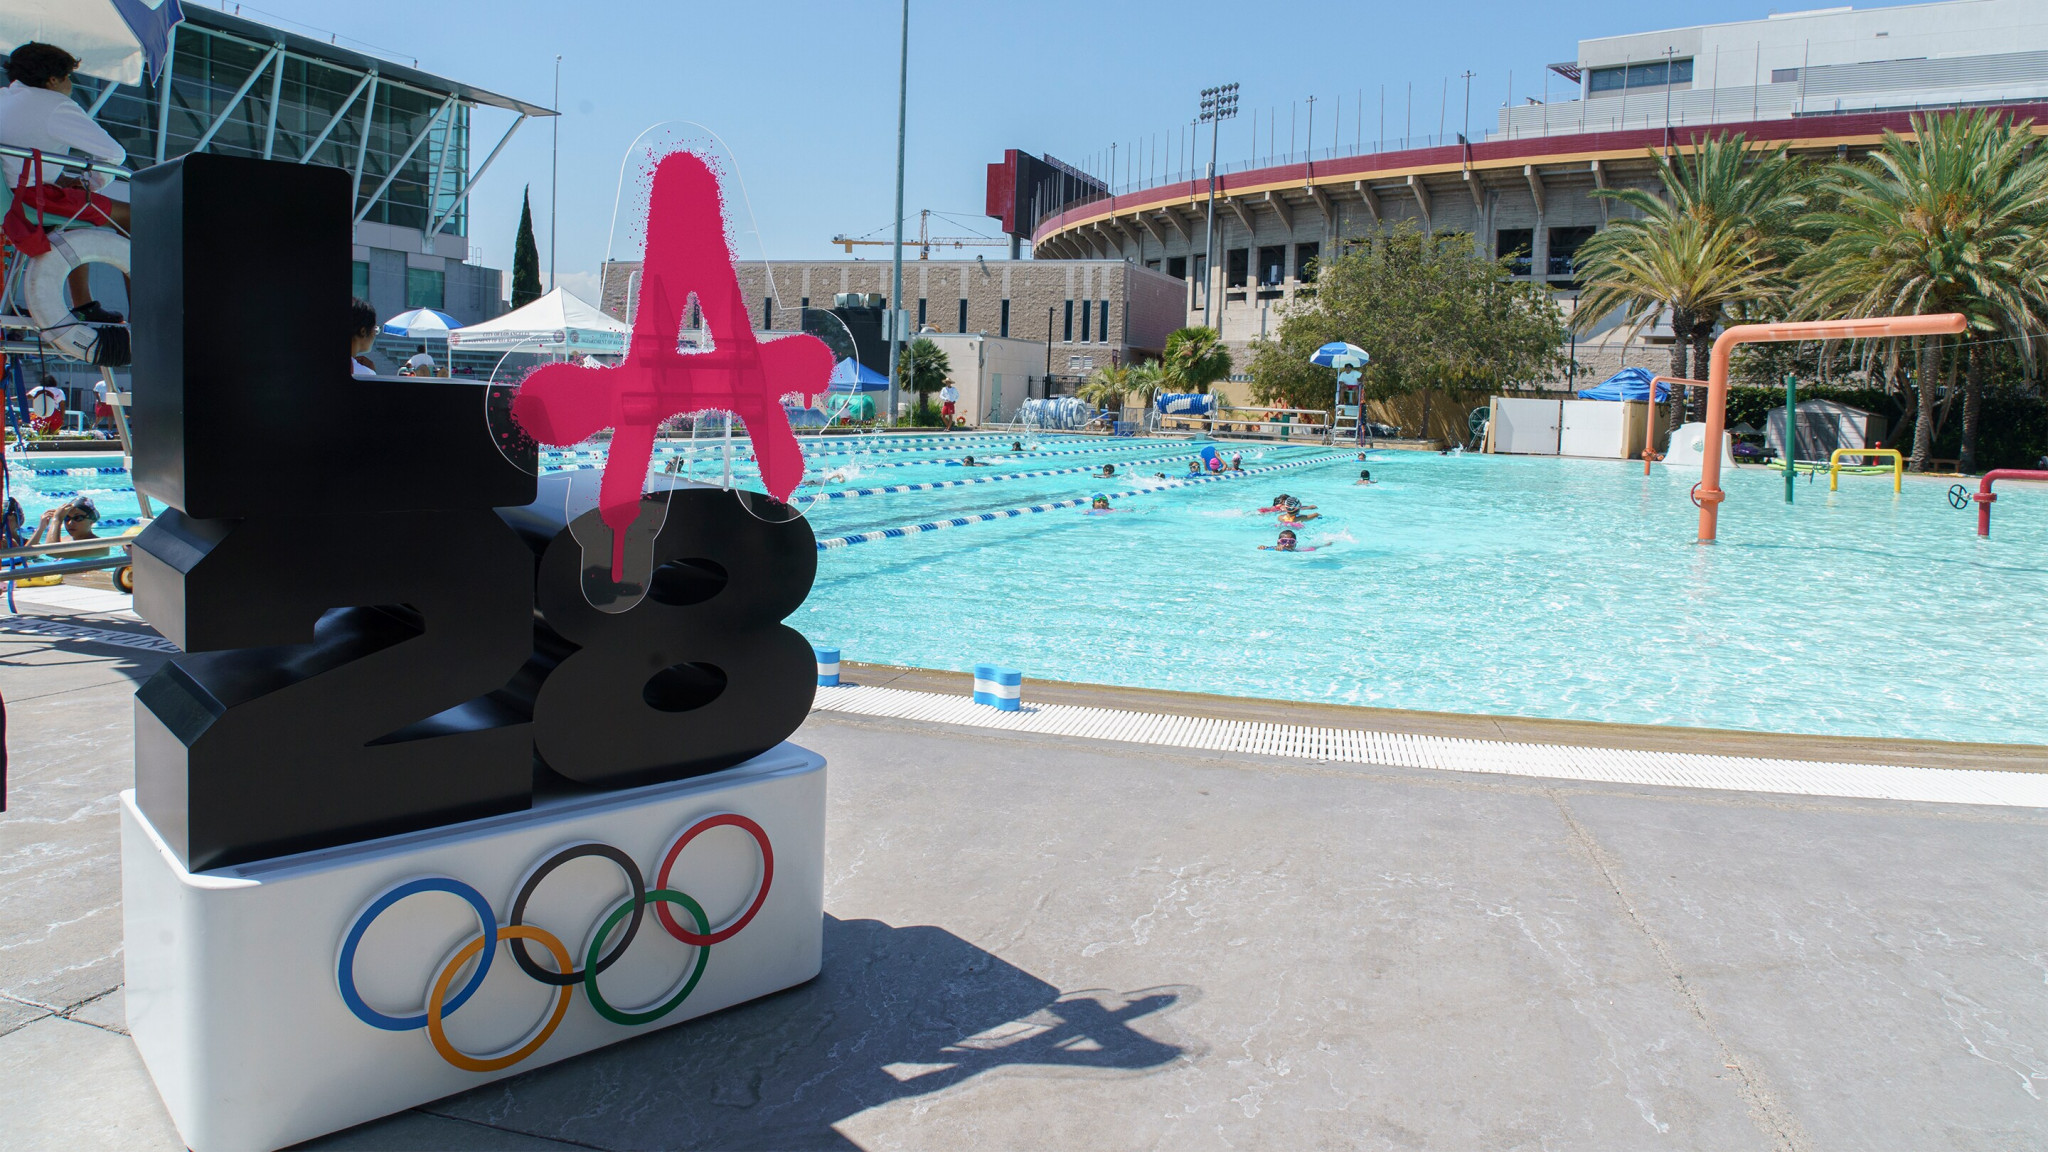 The dates have been announced for the 2028 Olympic and Paralympic Games in Los Angeles ©Los Angeles 2028